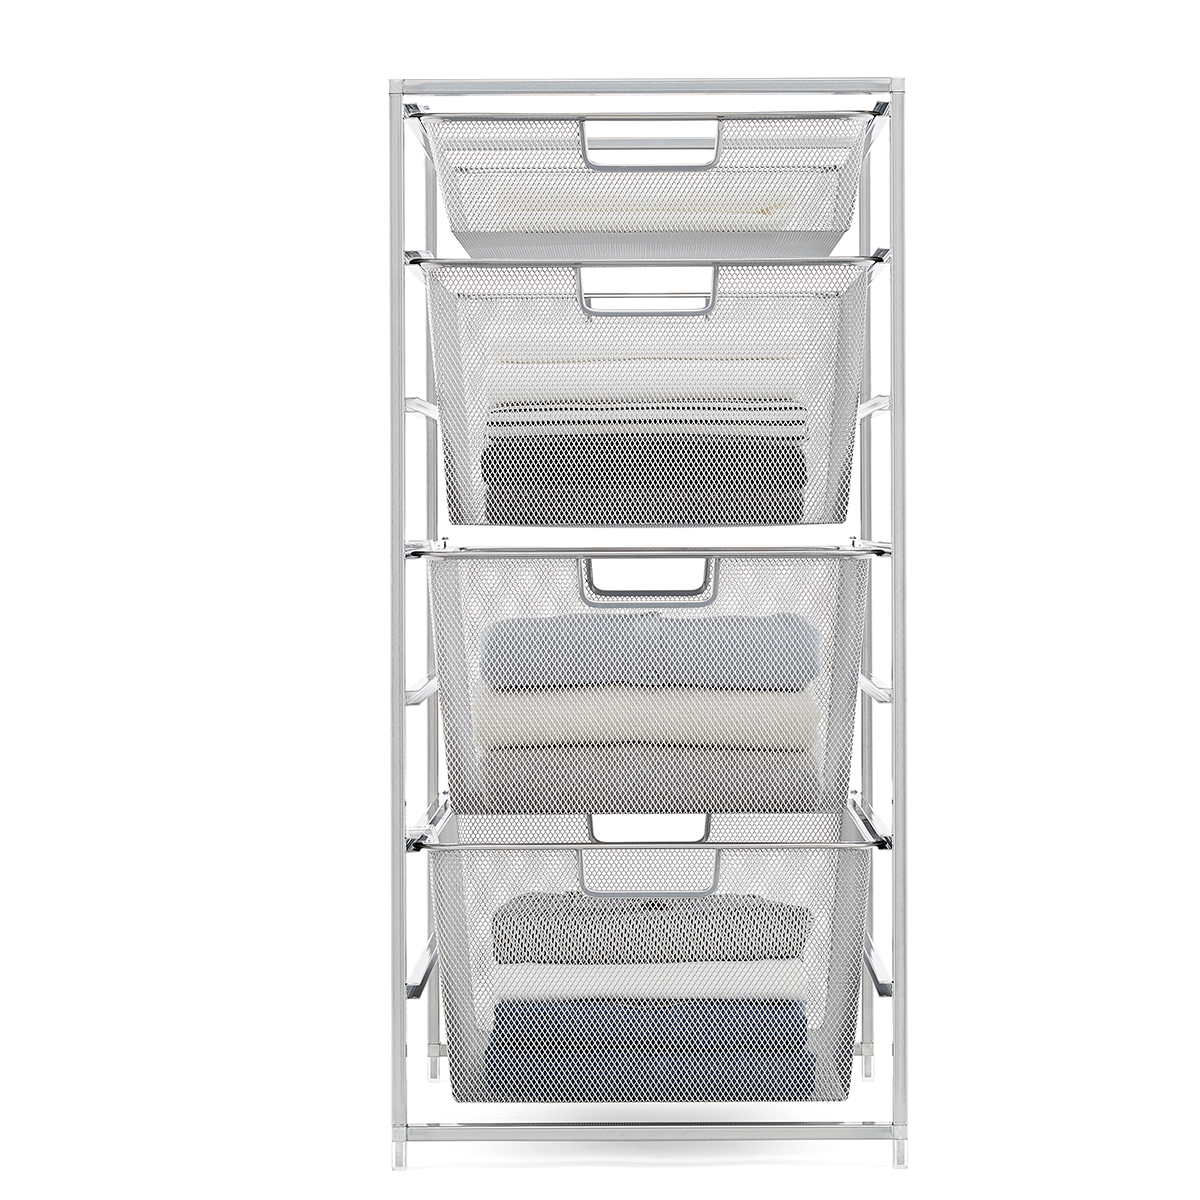 https://www.containerstore.com/catalogimages/402431/10082697-Elfa-Narrow-start-a-stack-p.jpg